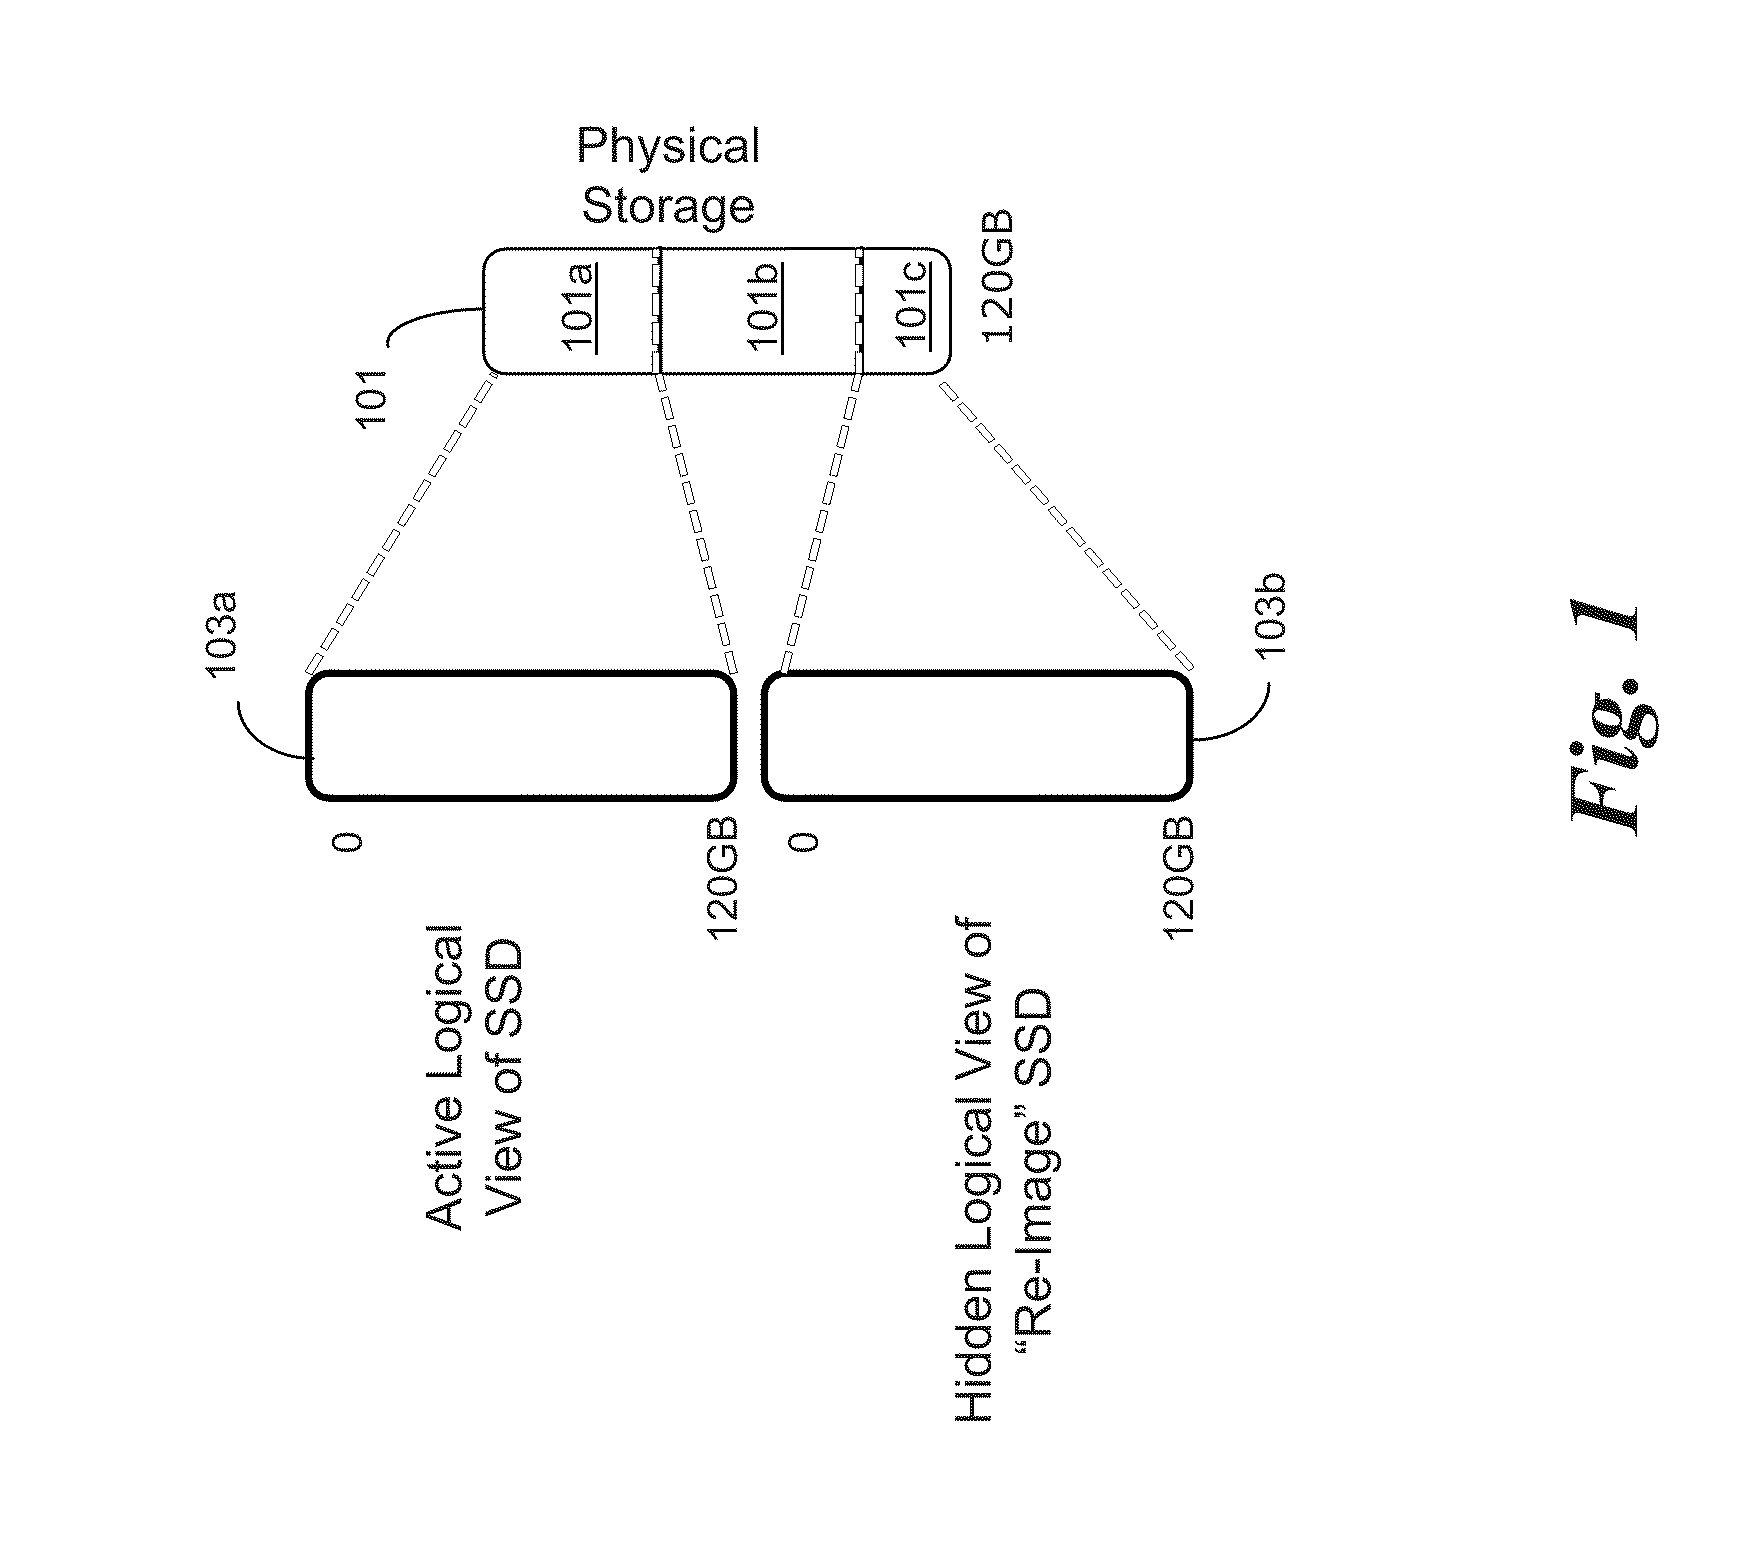 System and method for opportunistic re-imaging using cannibalistic storage techniques on sparse storage devices